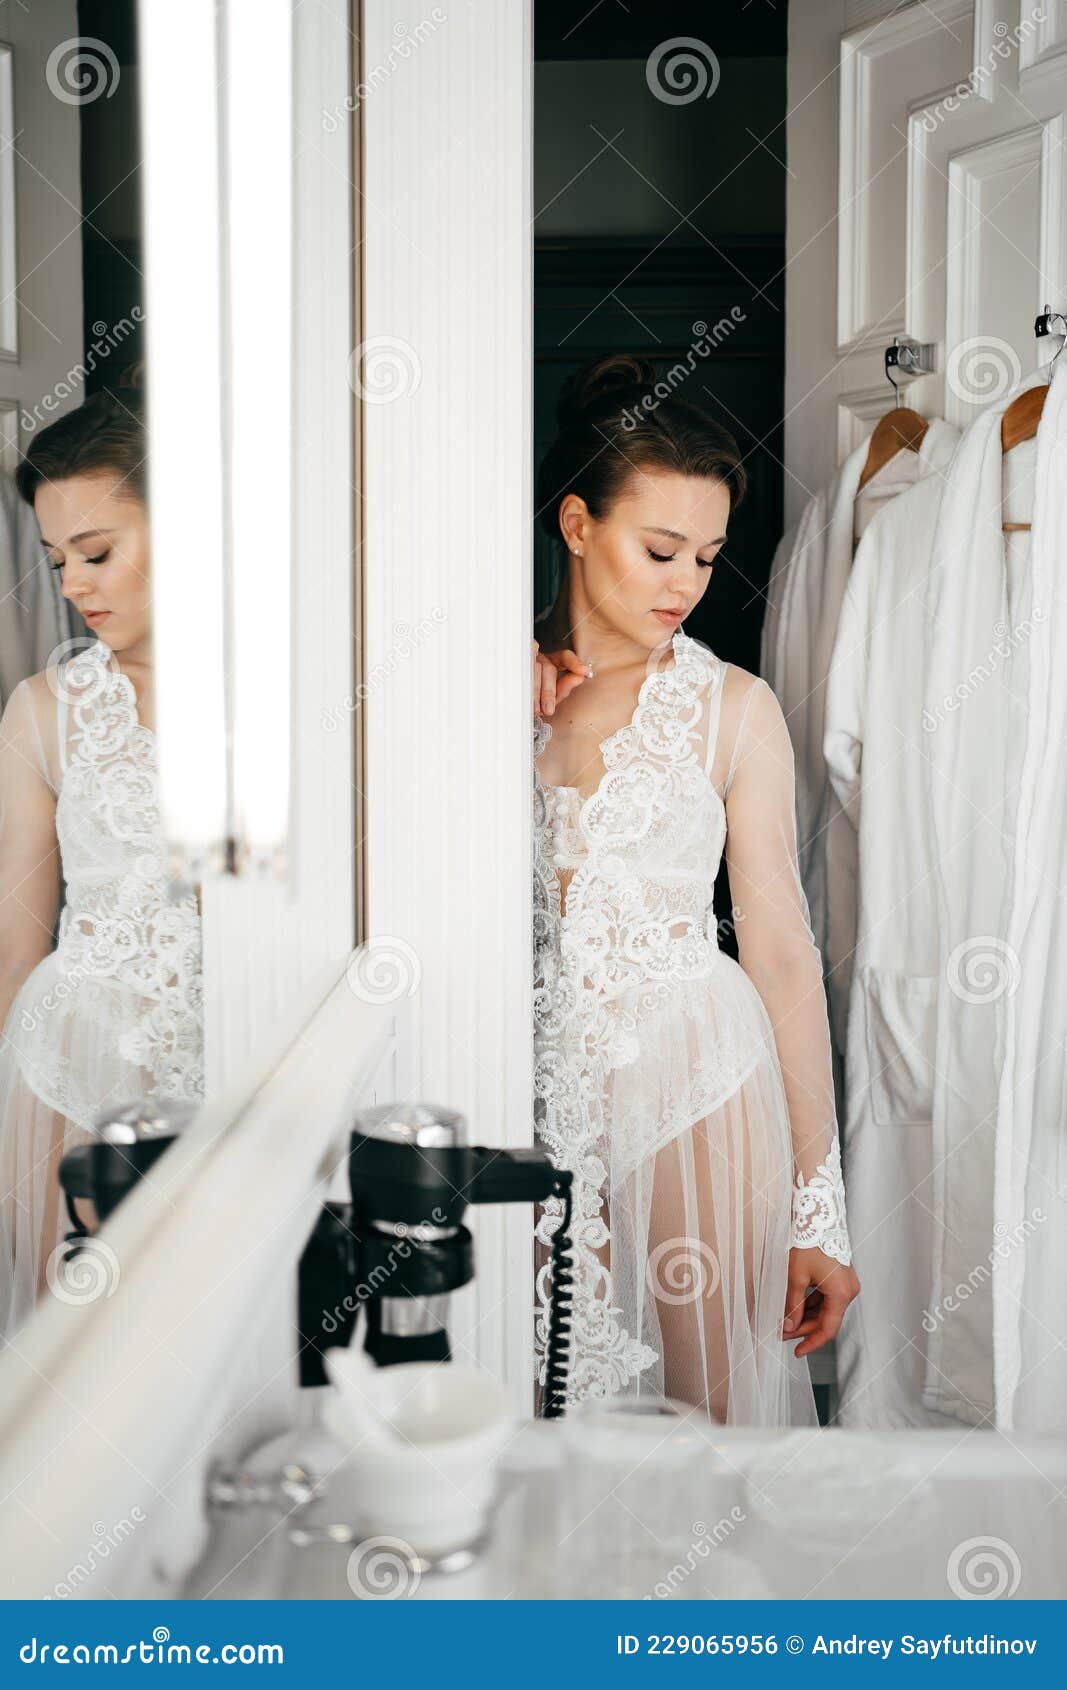 A Beautiful Young Woman in a Lace Robe at the Bathroom Door Stock